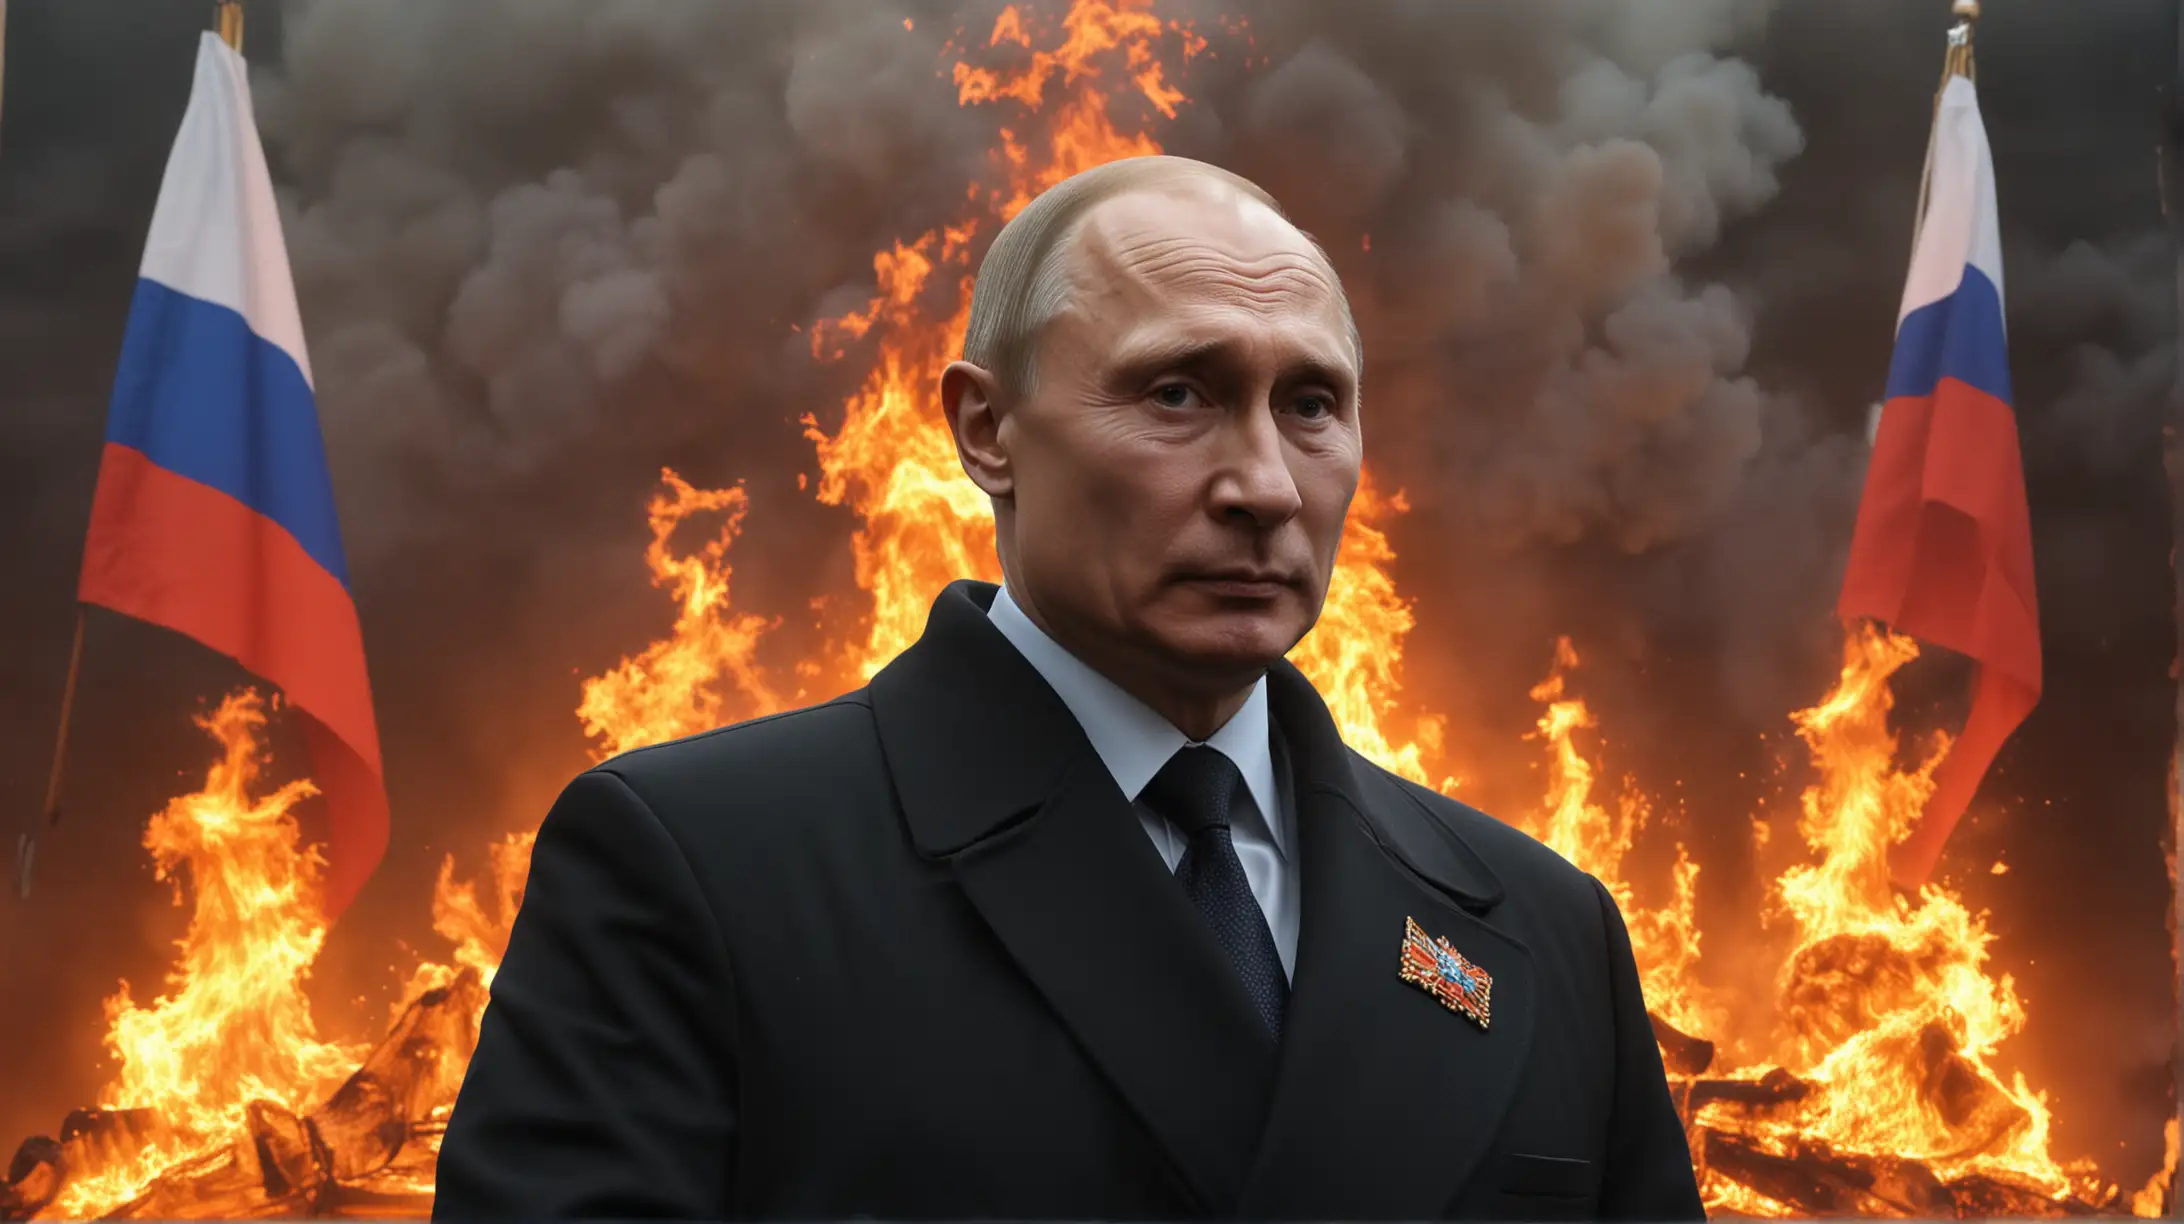 VLADIMIR-PUTIN-with-Sinister-Look-STANDING-in-Front-of-A BIG Burning-RUSSIAN-Flag